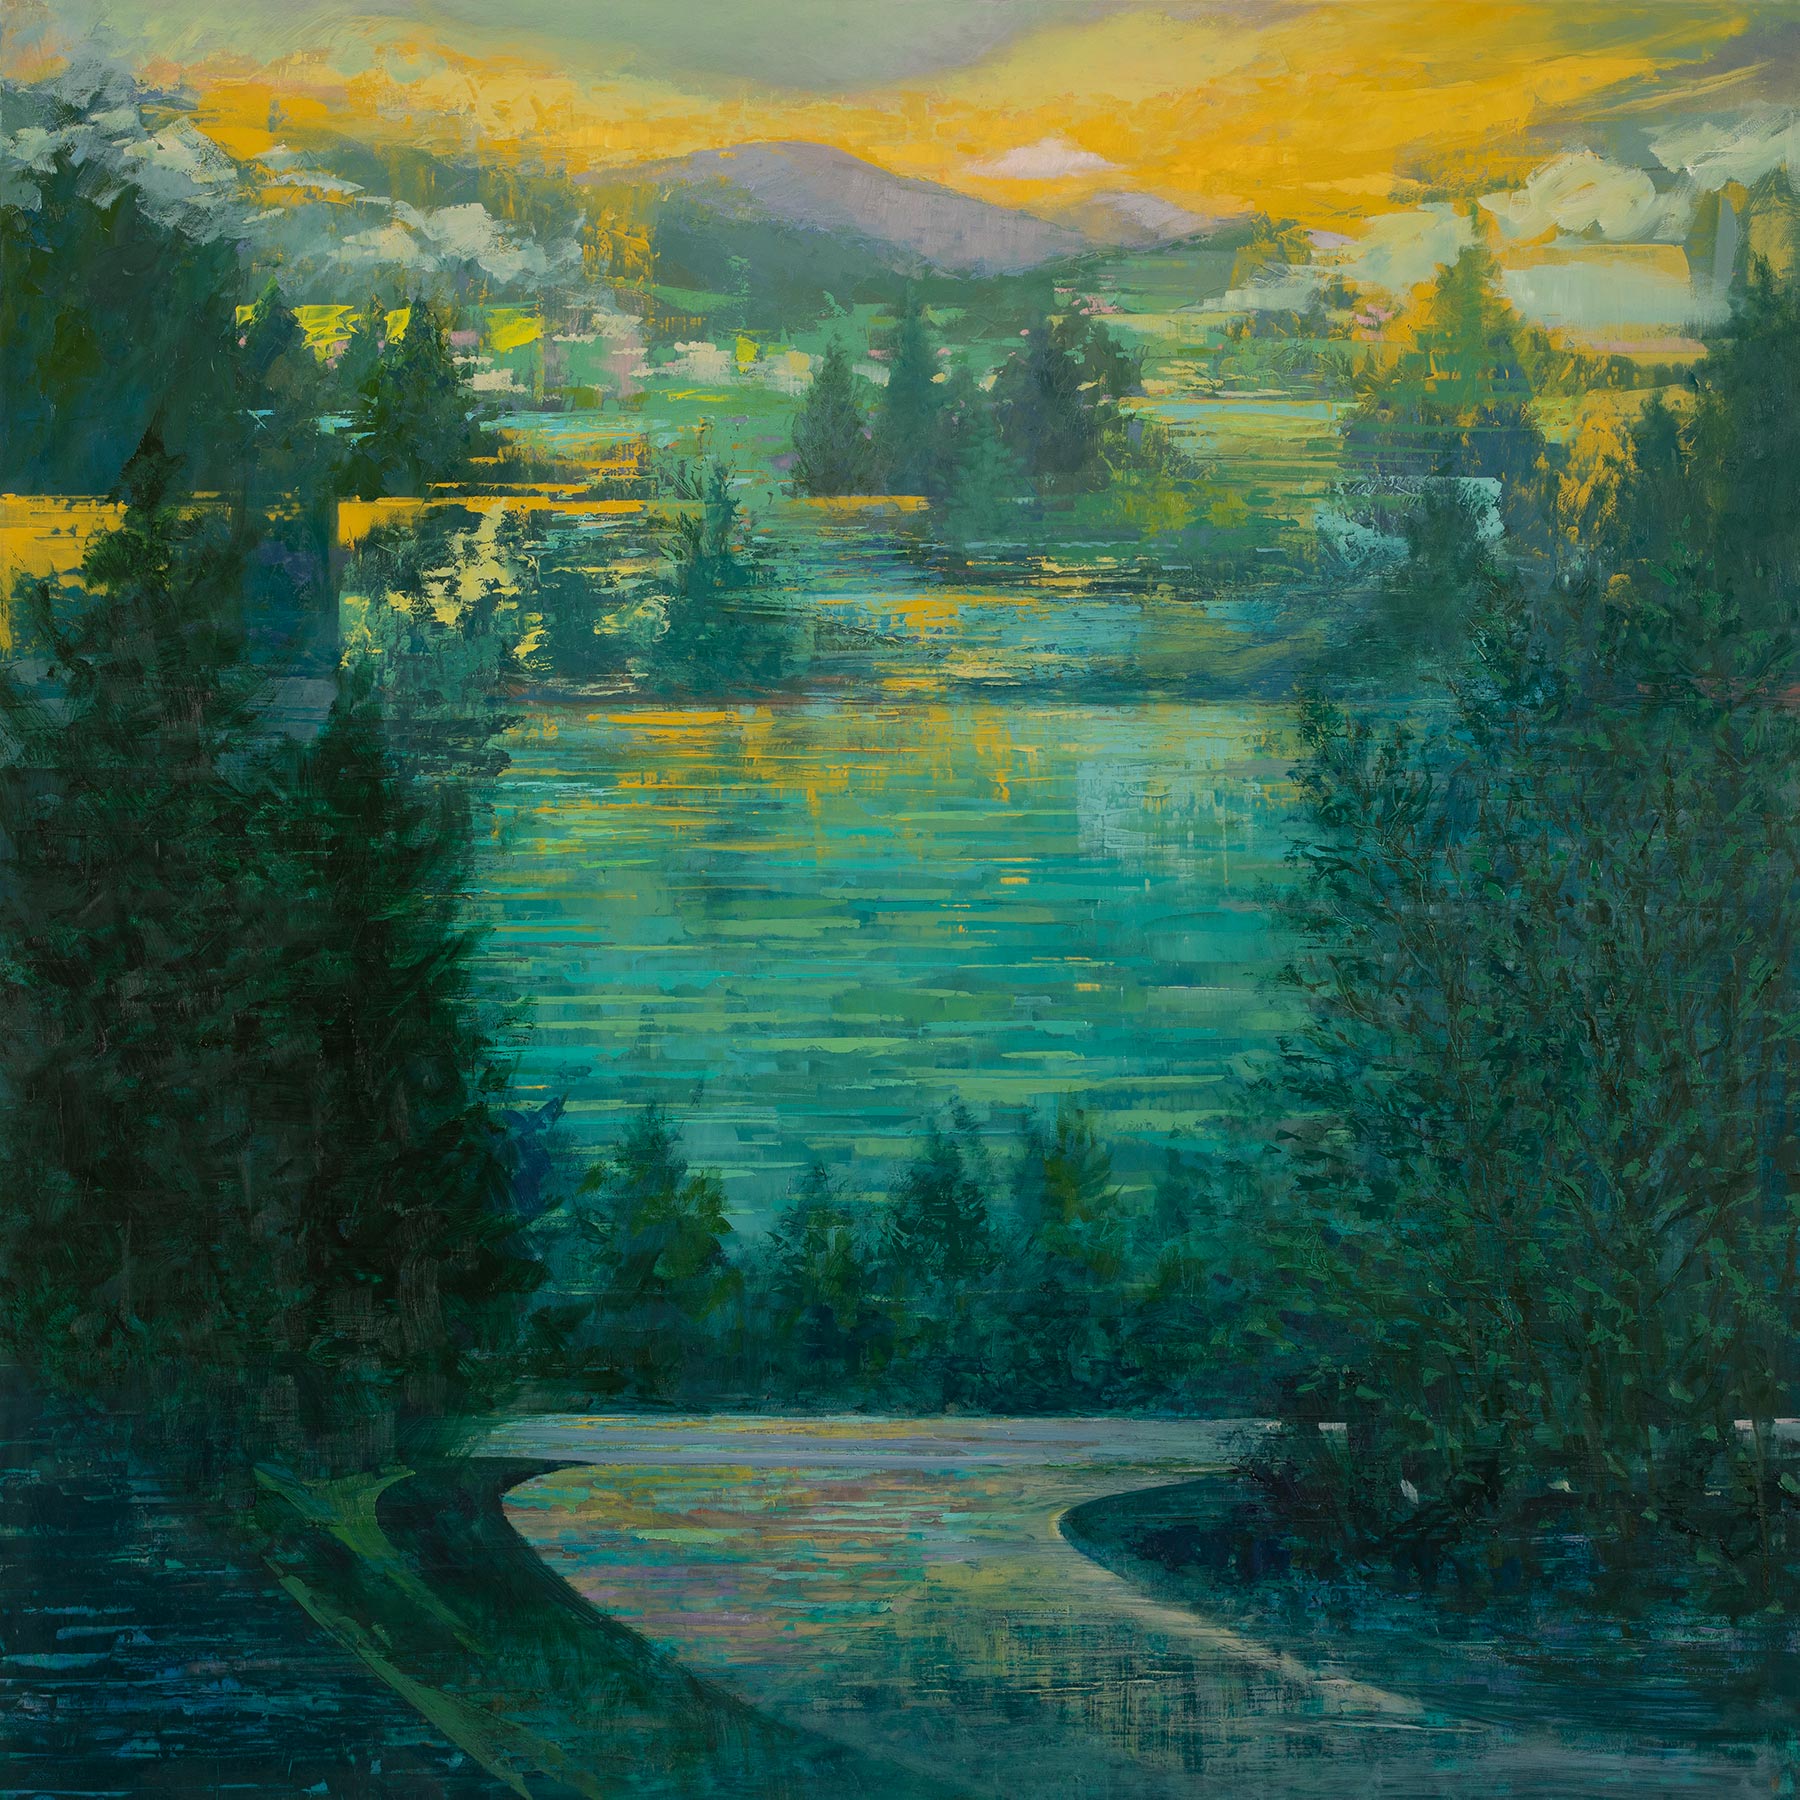 View from the Ridge: Great Flood, oil on panel, 30 x 30 inches, 2020, SOLD